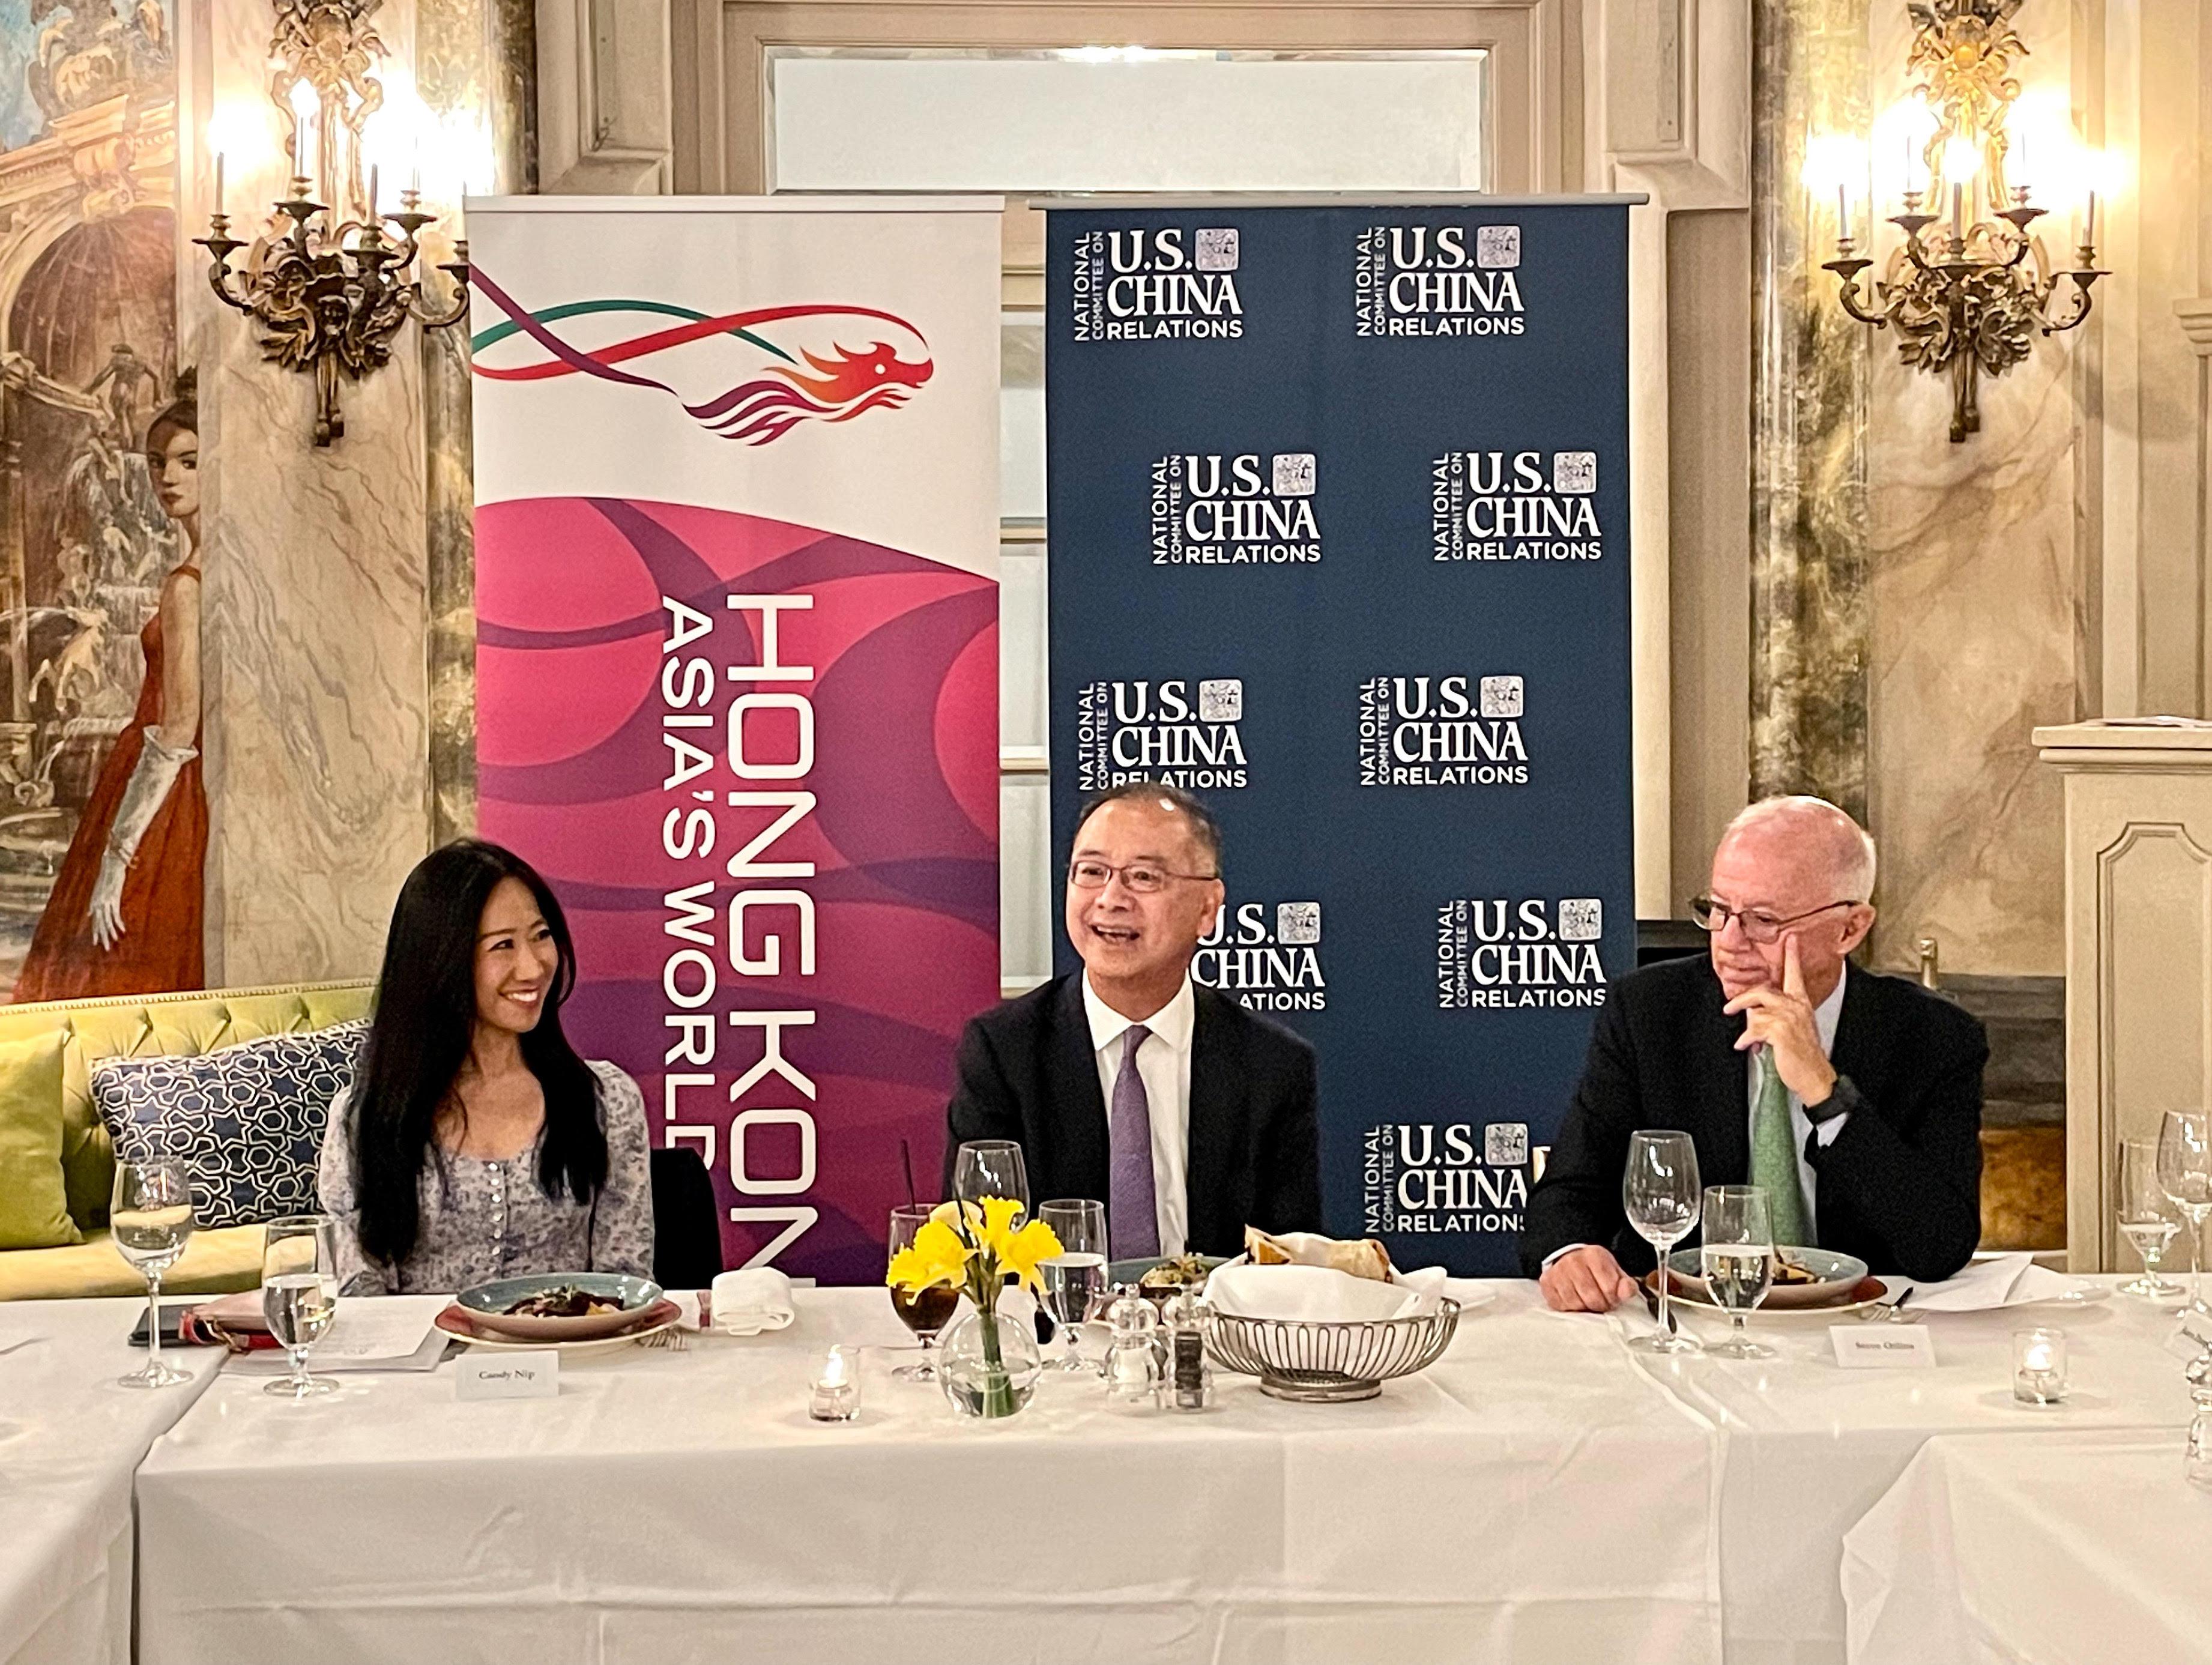 The Chief Executive of the Hong Kong Monetary Authority, Mr Eddie Yue (centre), spoke at a luncheon organised by the Hong Kong Economic and Trade Office, New York (HKETONY), and the National Committee on US-China Relations (NCUSCR) in New York on April 12 (New York time). Photo shows the Director of HKETONY, Ms Candy Nip (left), and the President of the NCUSCR, Mr Stephen Orlins (right). 